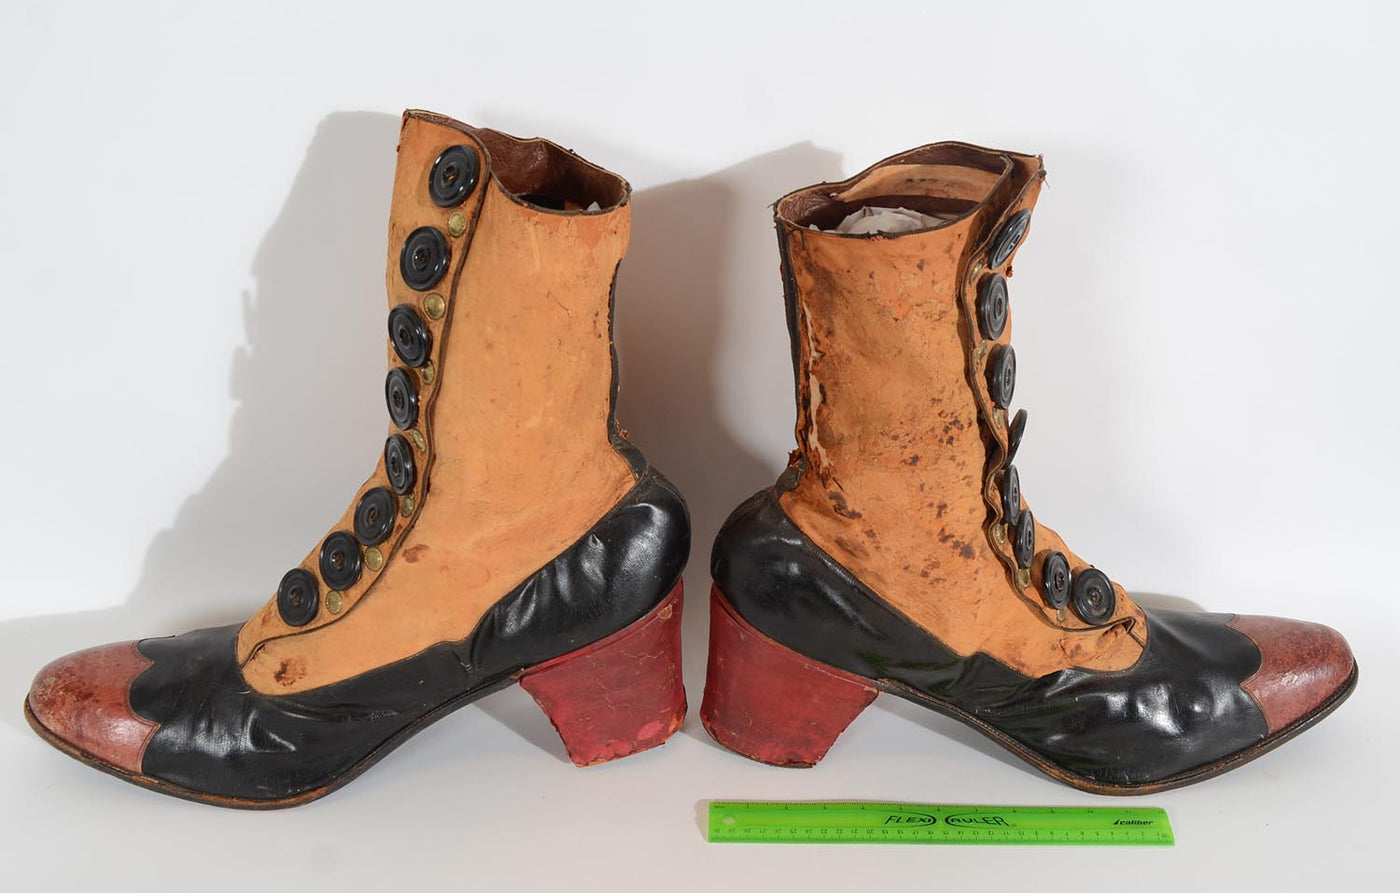 1358679-19th-century-high-button-shoes-display-size-comparison